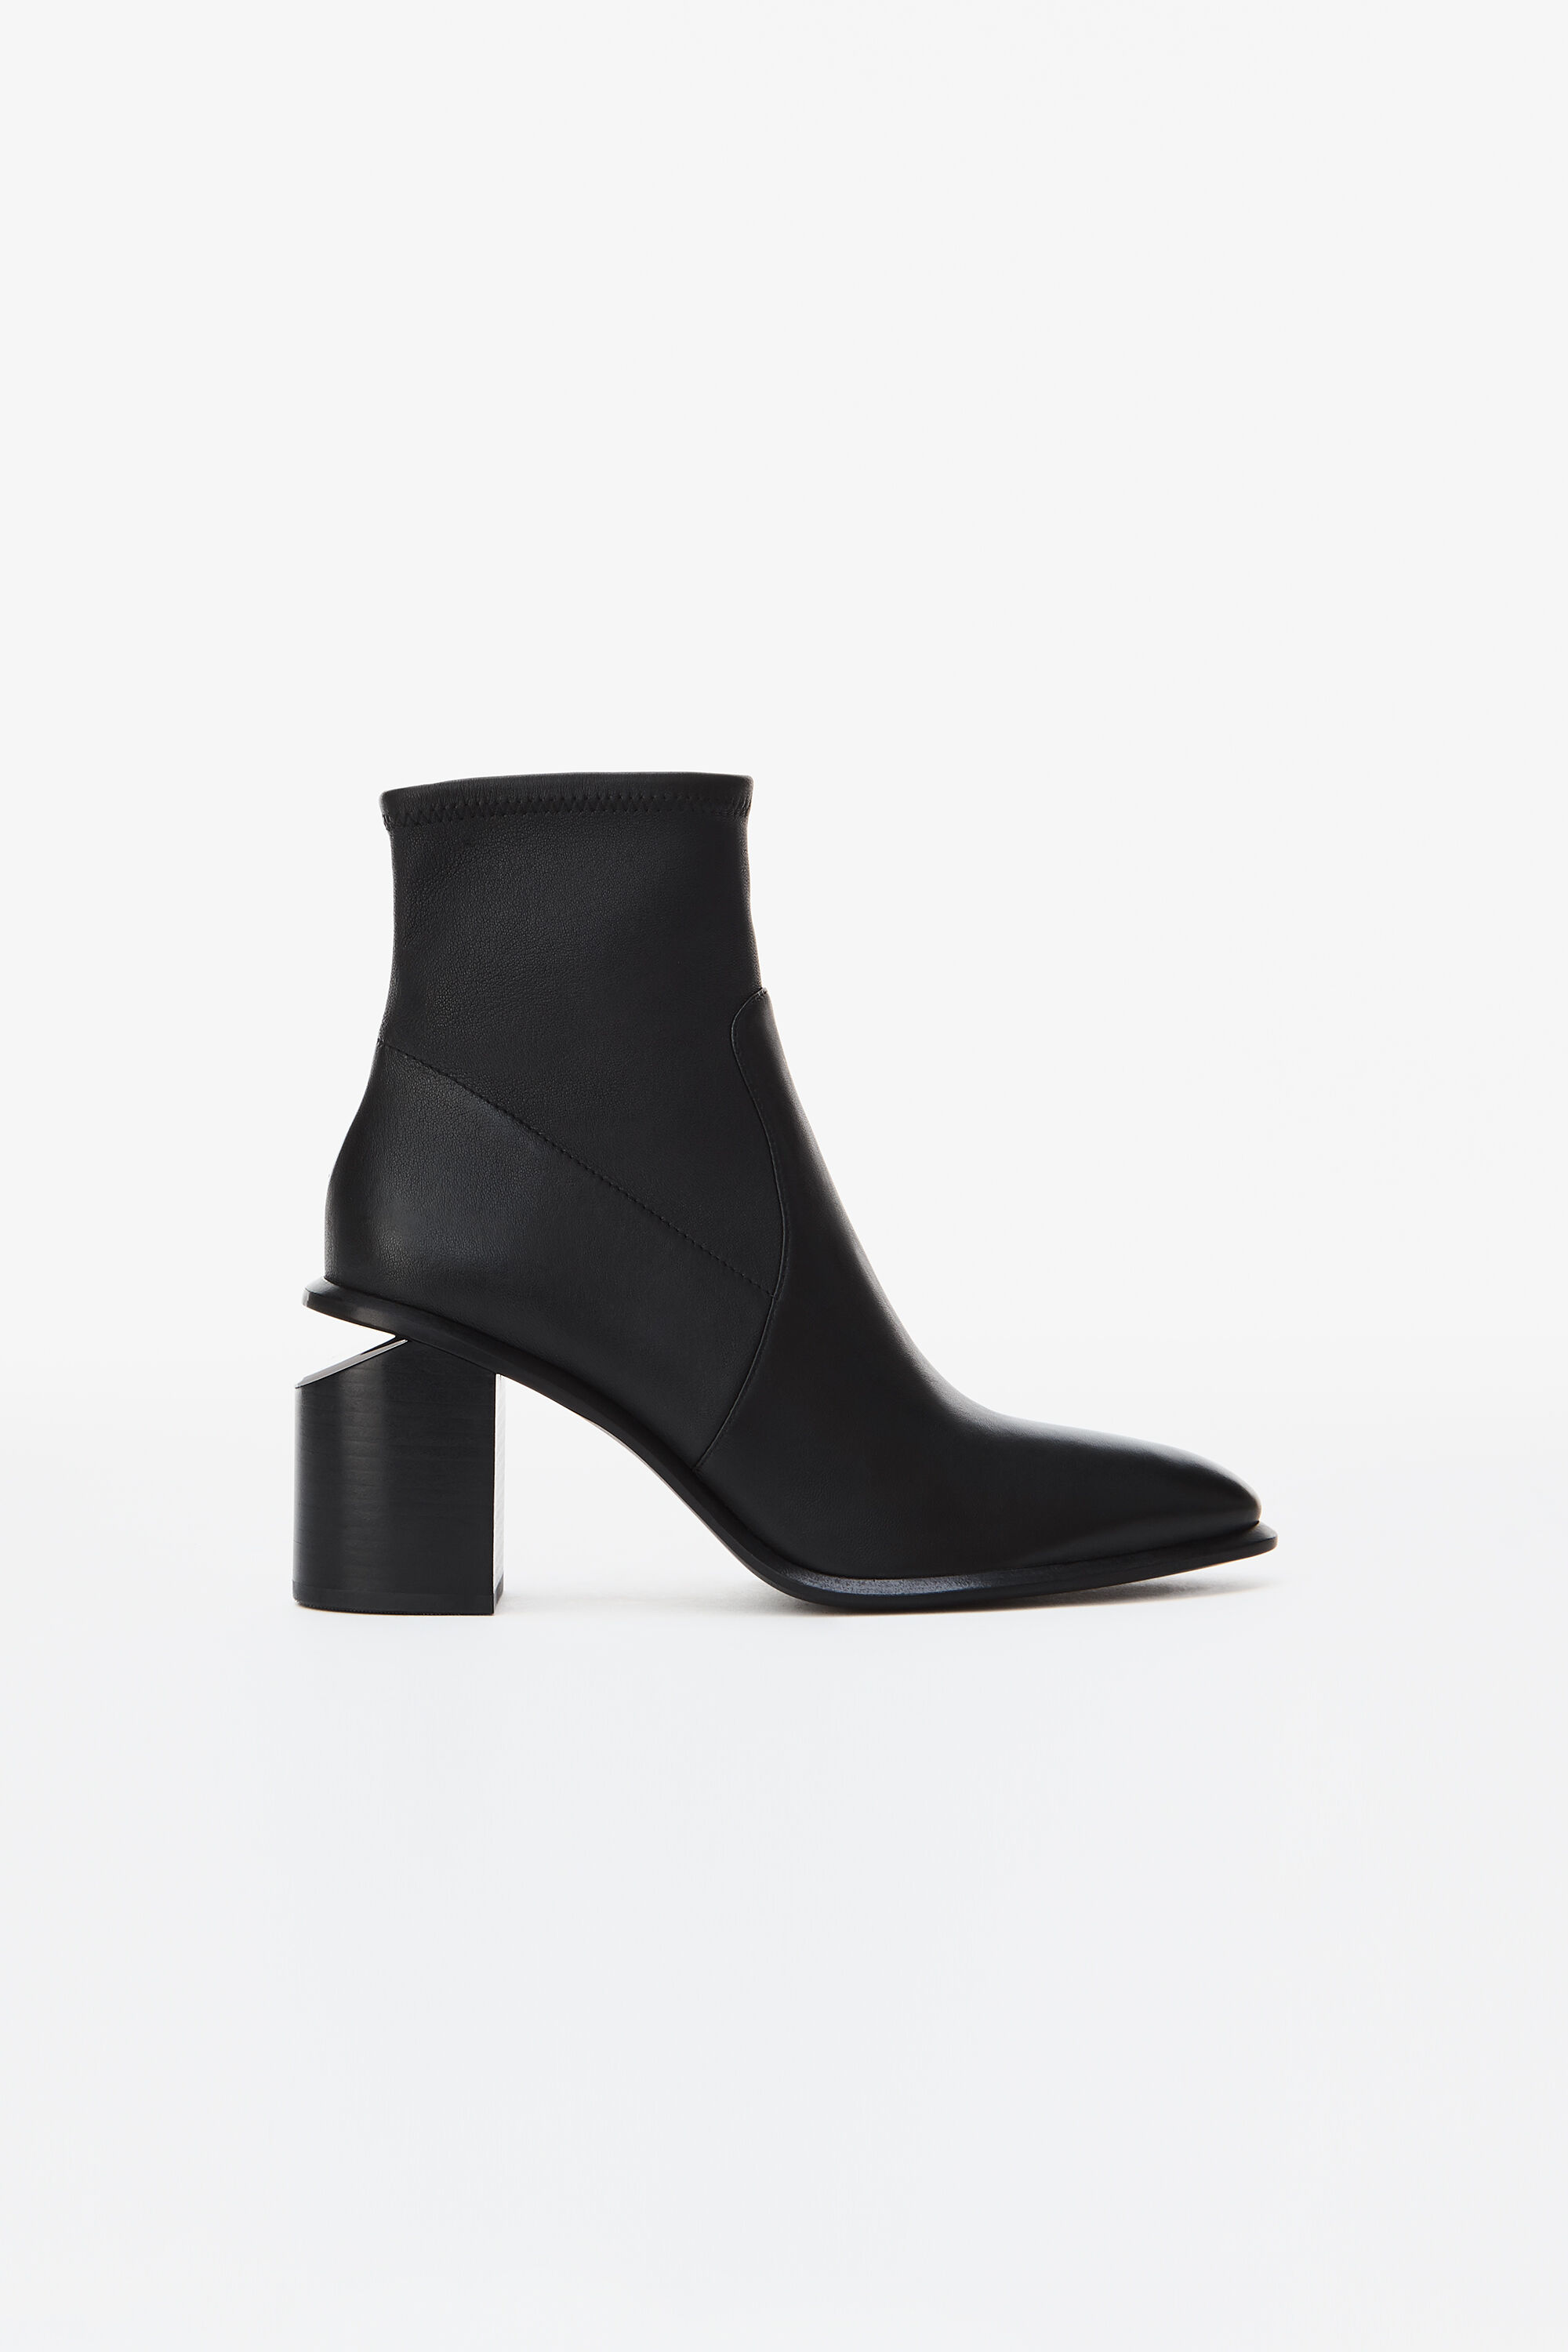 alexander wang ankle boots